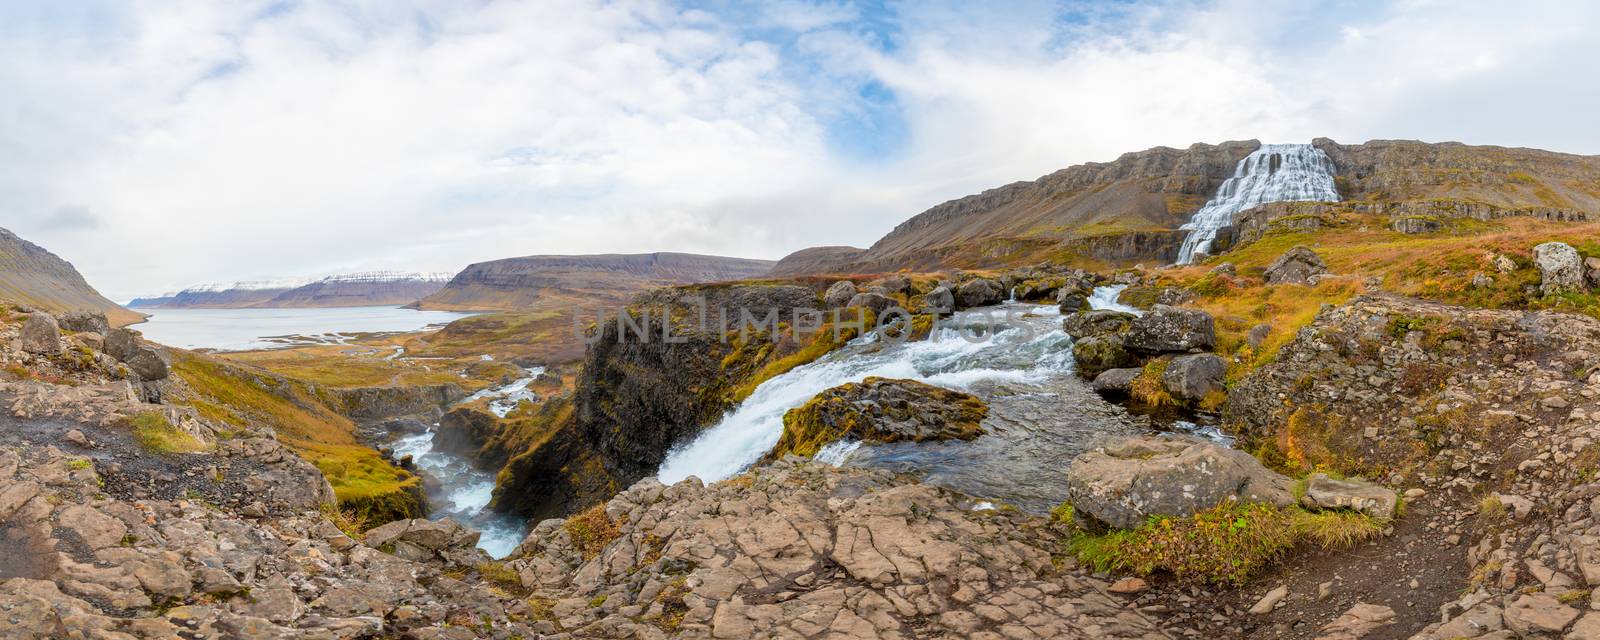 Westfjords of Iceland Göngummanafoss and Dynjandi waterfall panorama of fall and the snow covered fjord by MXW_Stock